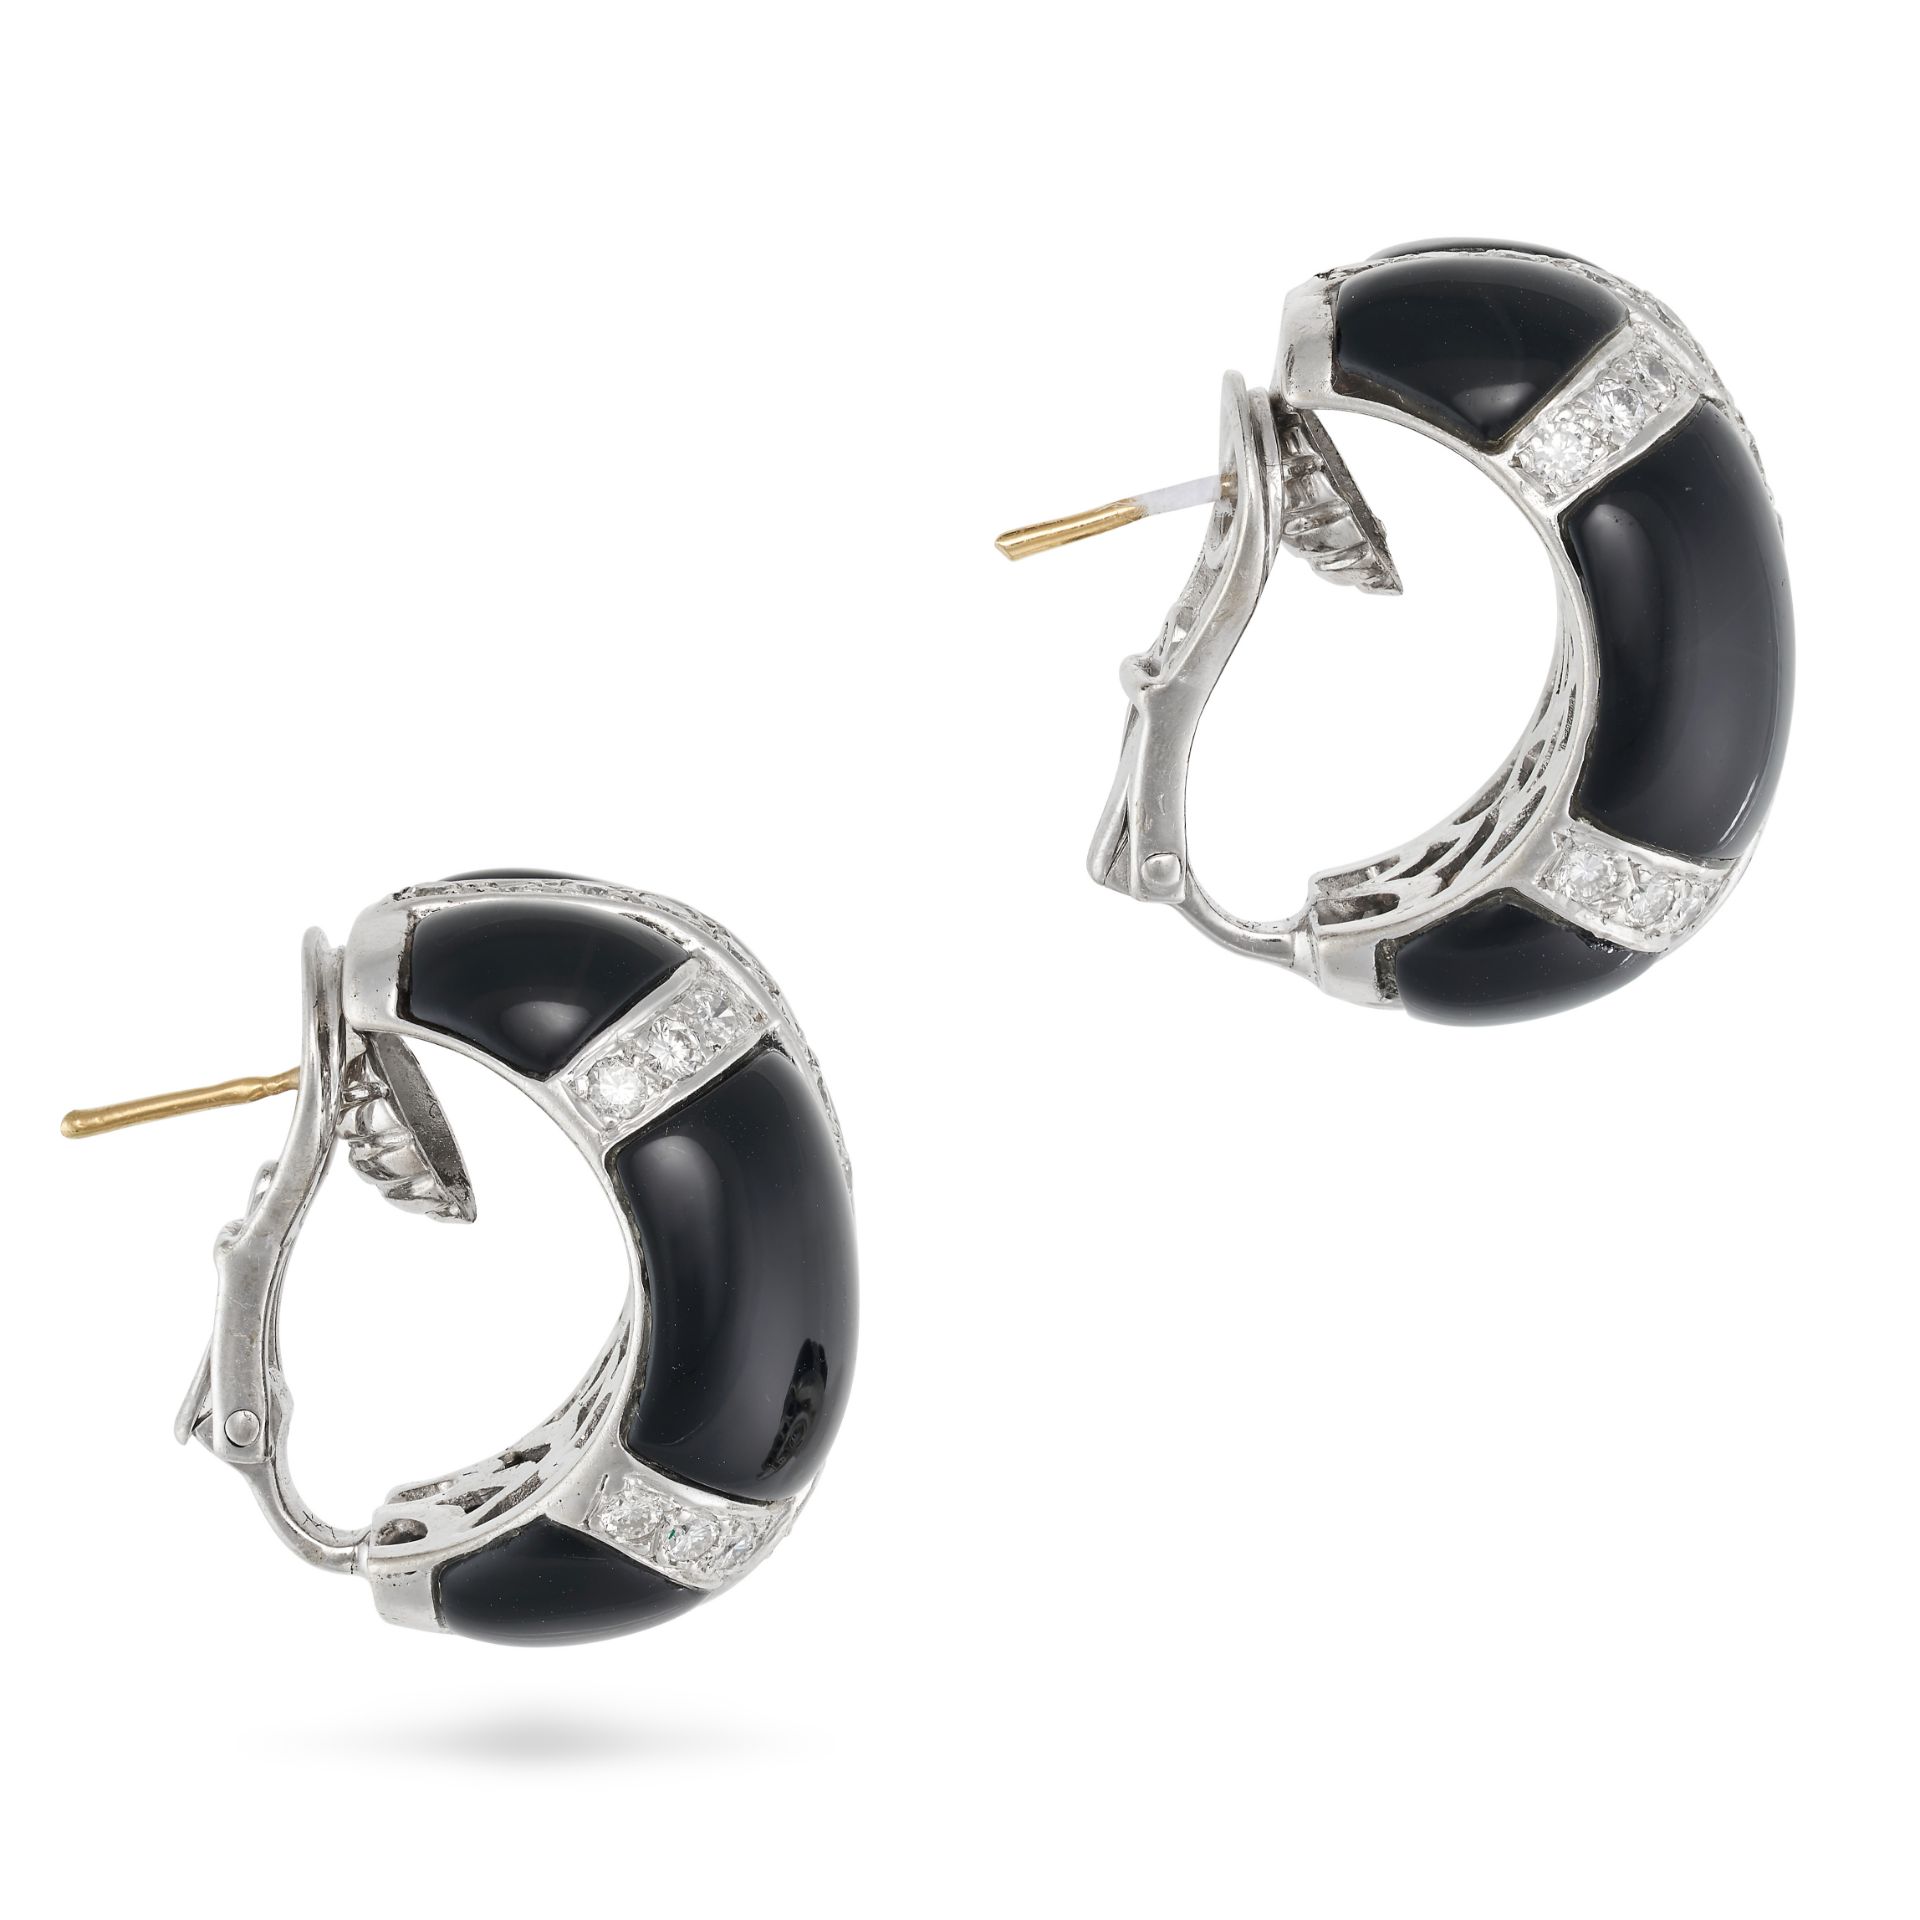 A PAIR OF ITALIAN ONYX AND DIAMOND EARRINGS in 18ct white gold, of modernist design with applied ... - Bild 2 aus 2